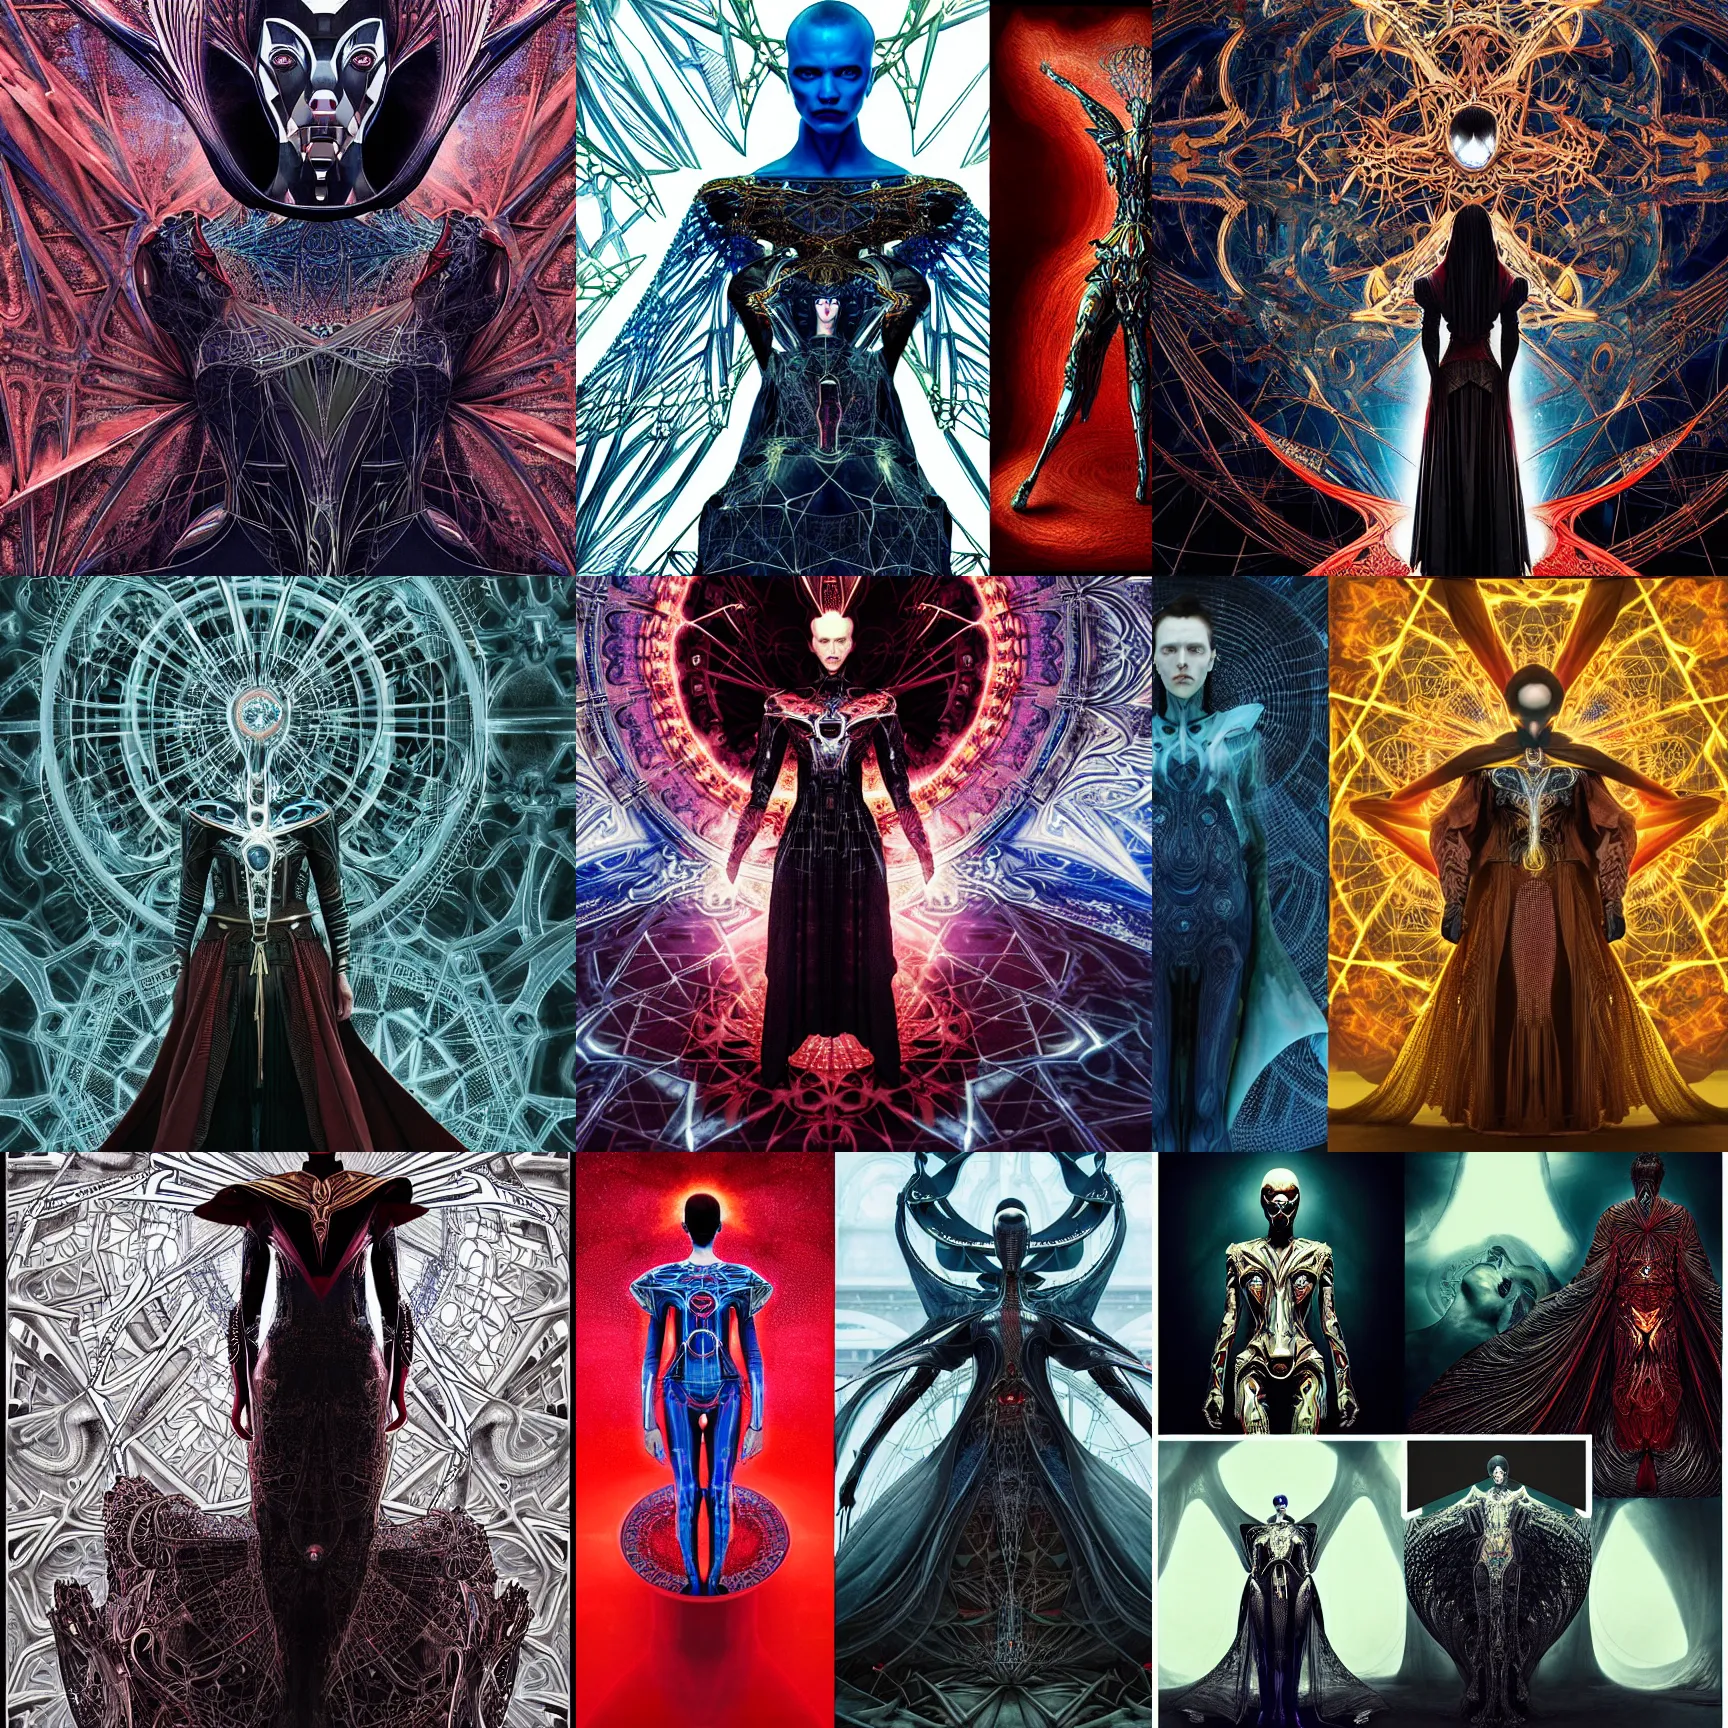 Prompt: symmetric frame from Doctor Strange inception, angel mecha cyborg, by Iris van Herpen and alexander mcqueen metal couture editorial, eldritch epic monumental attack by beksinski by Yuko Shimizu